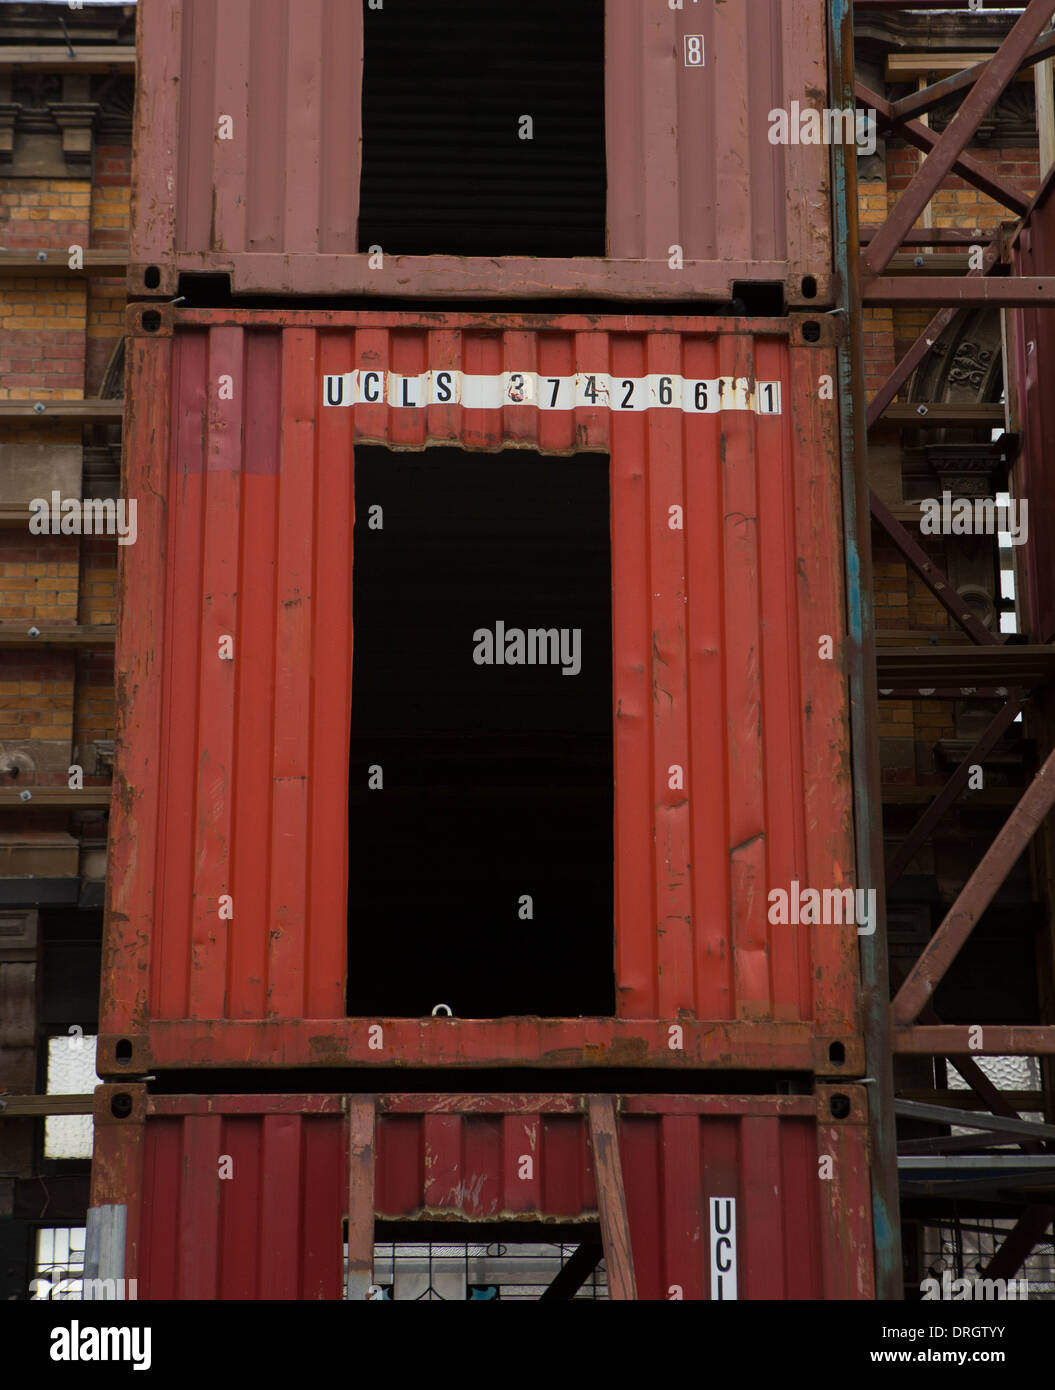 Shipping container with door cut out. Stock Photo